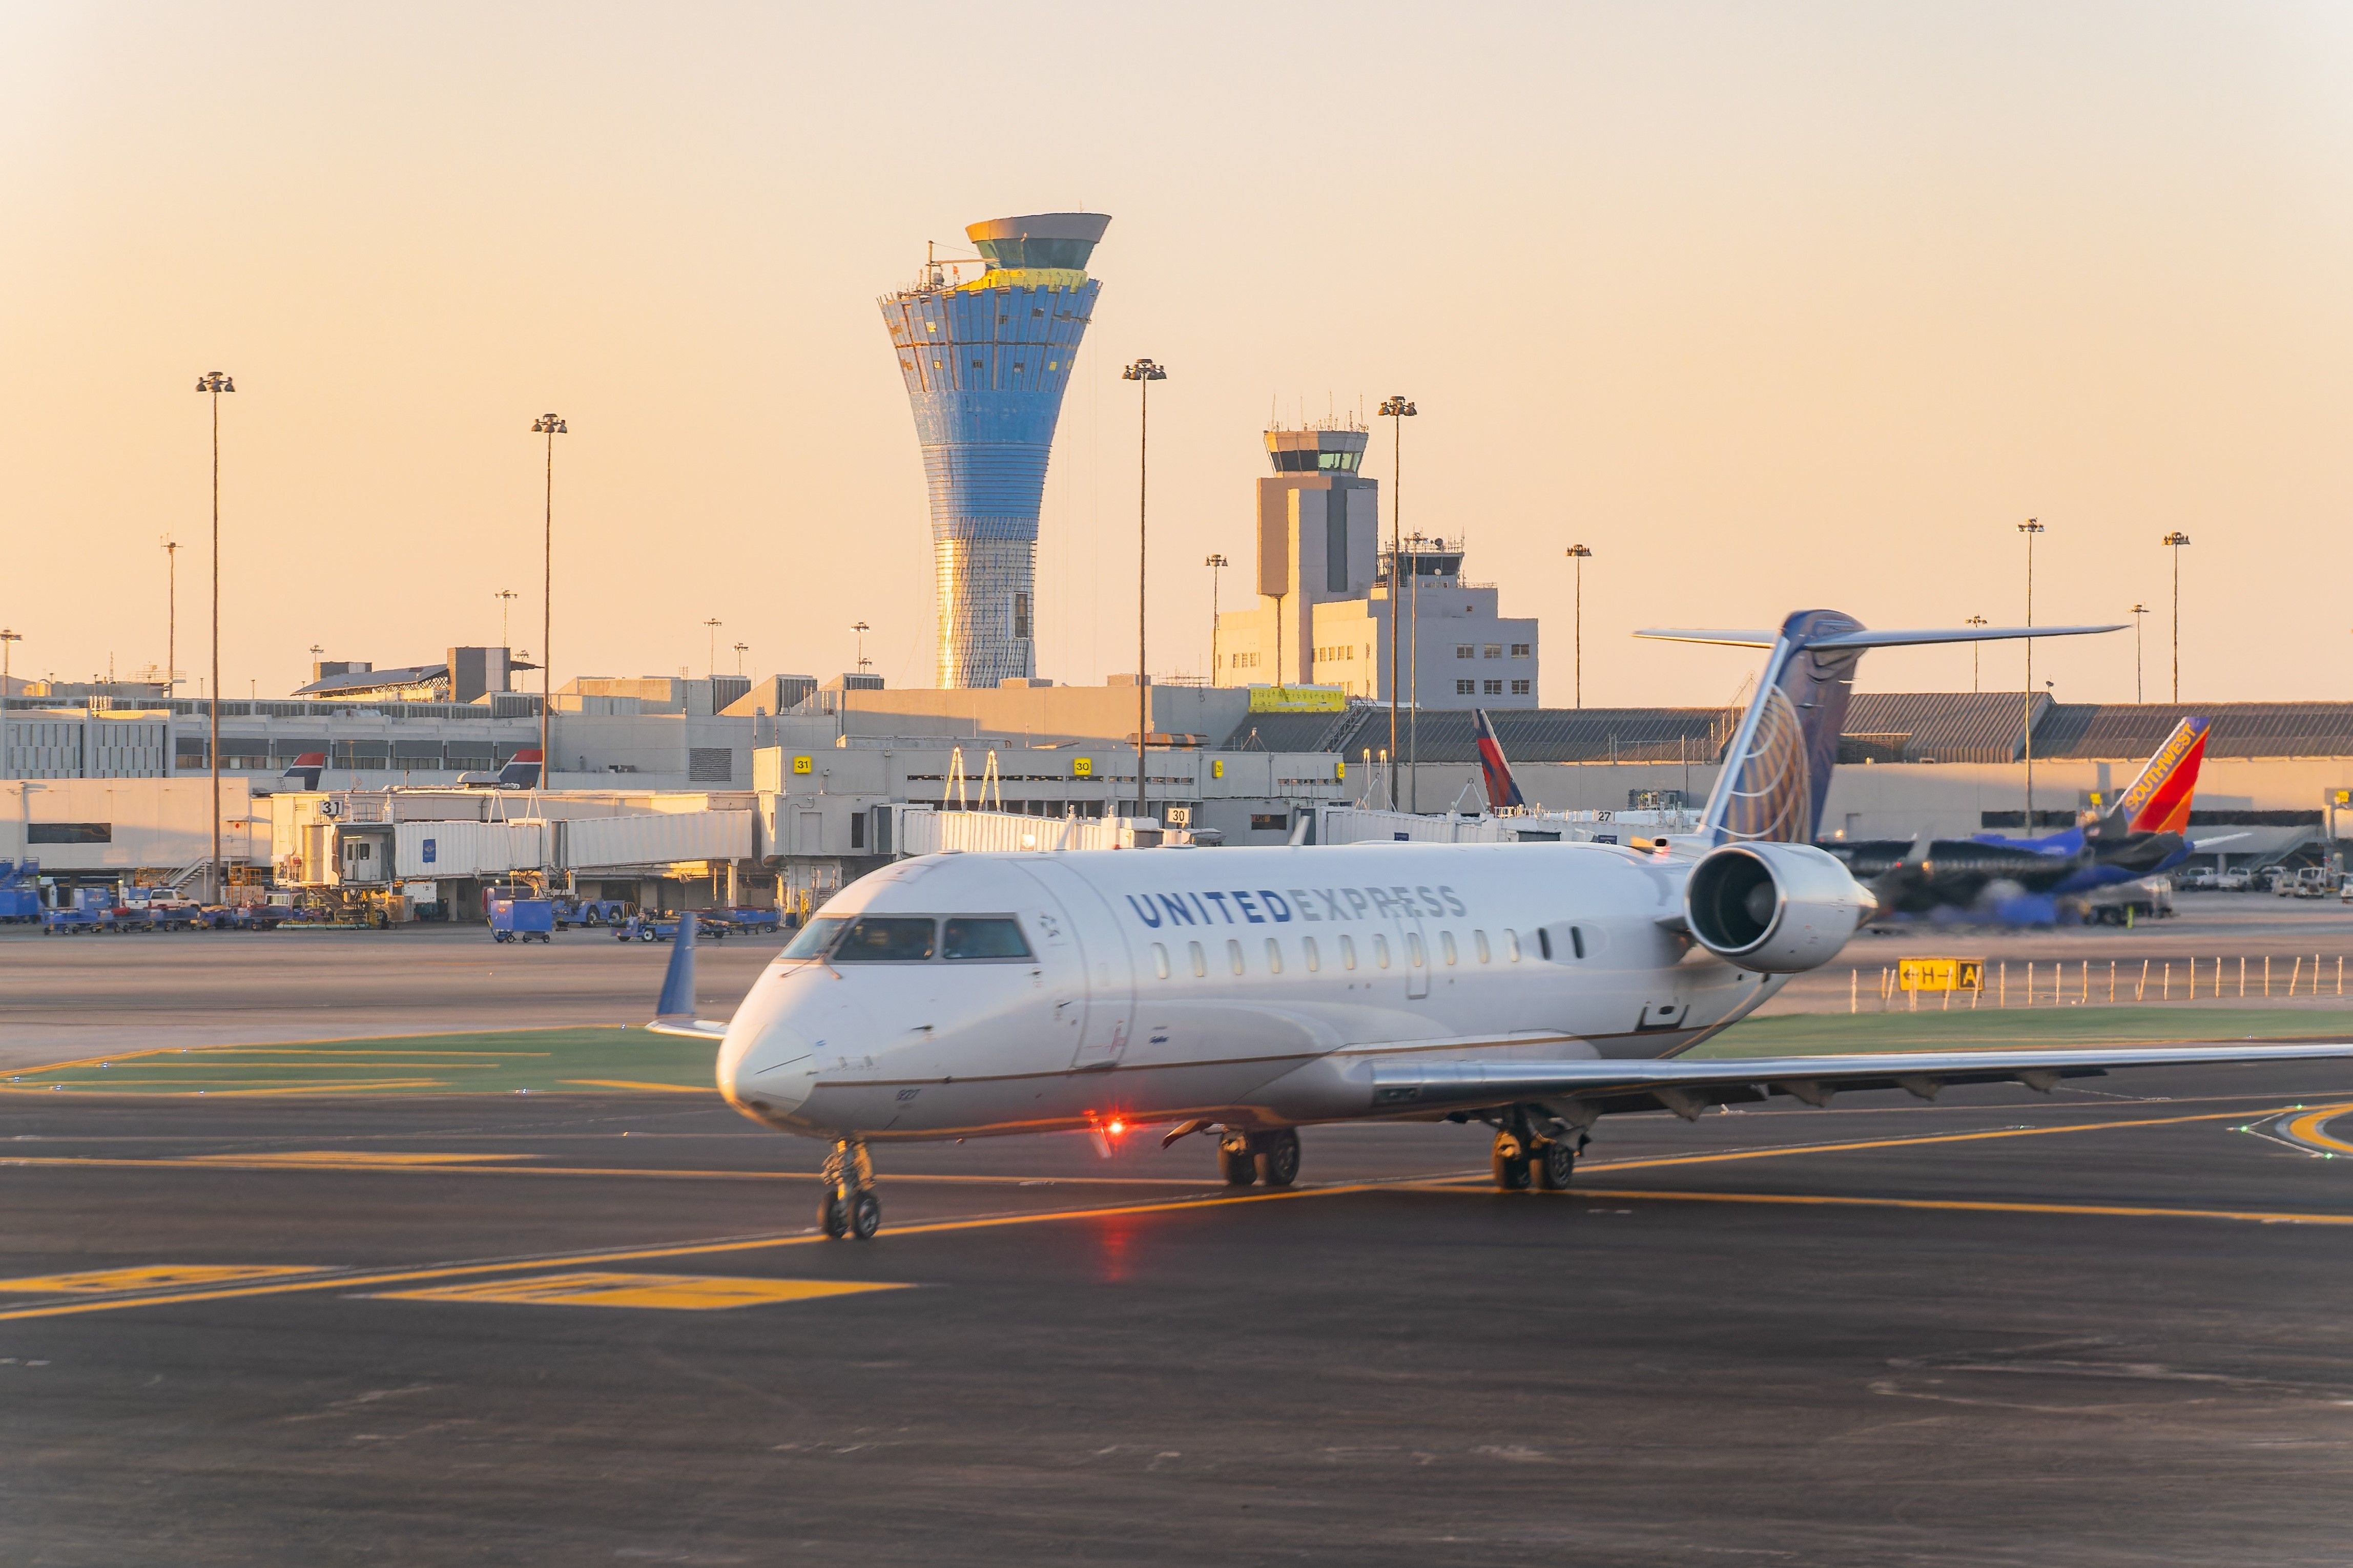 A United Express Bombardier CRJ Taxiing In San Francisco.